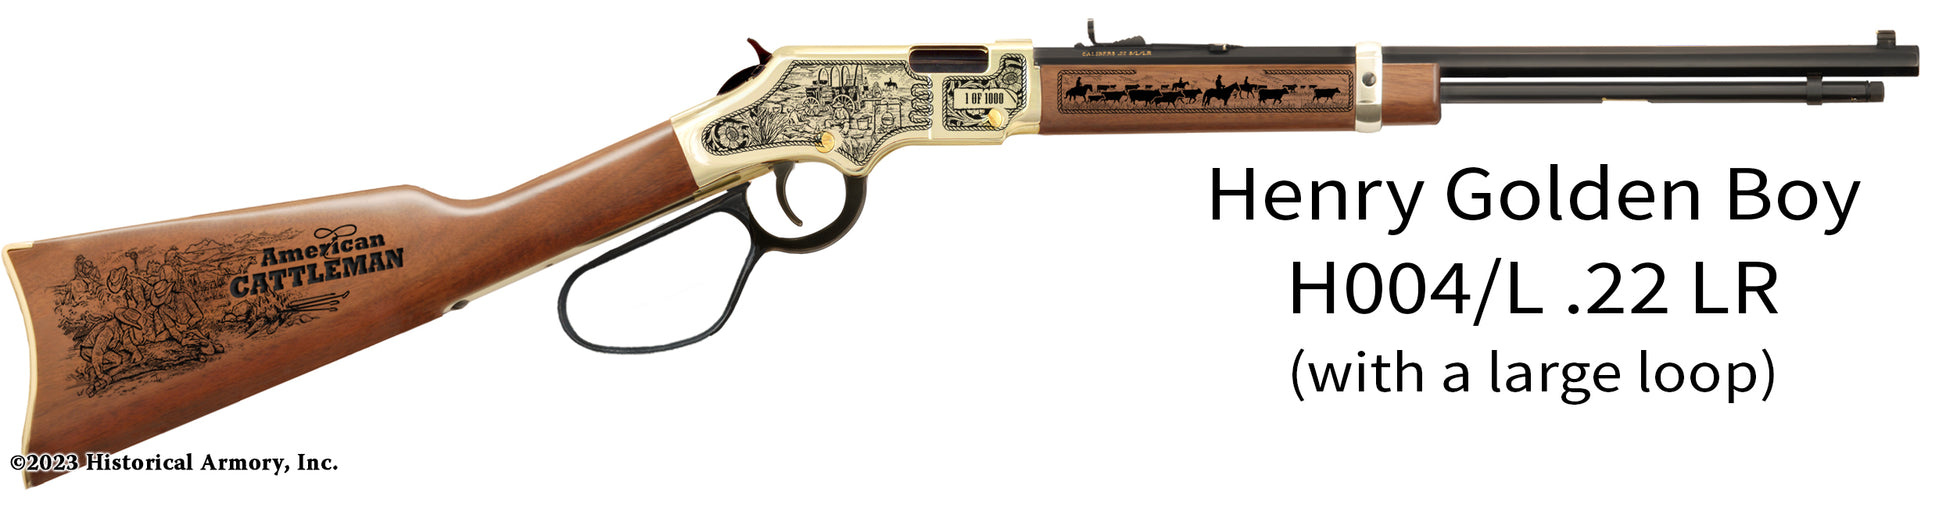 American Cattleman Limited Edition Henry Golden Boy Engraved Rifle